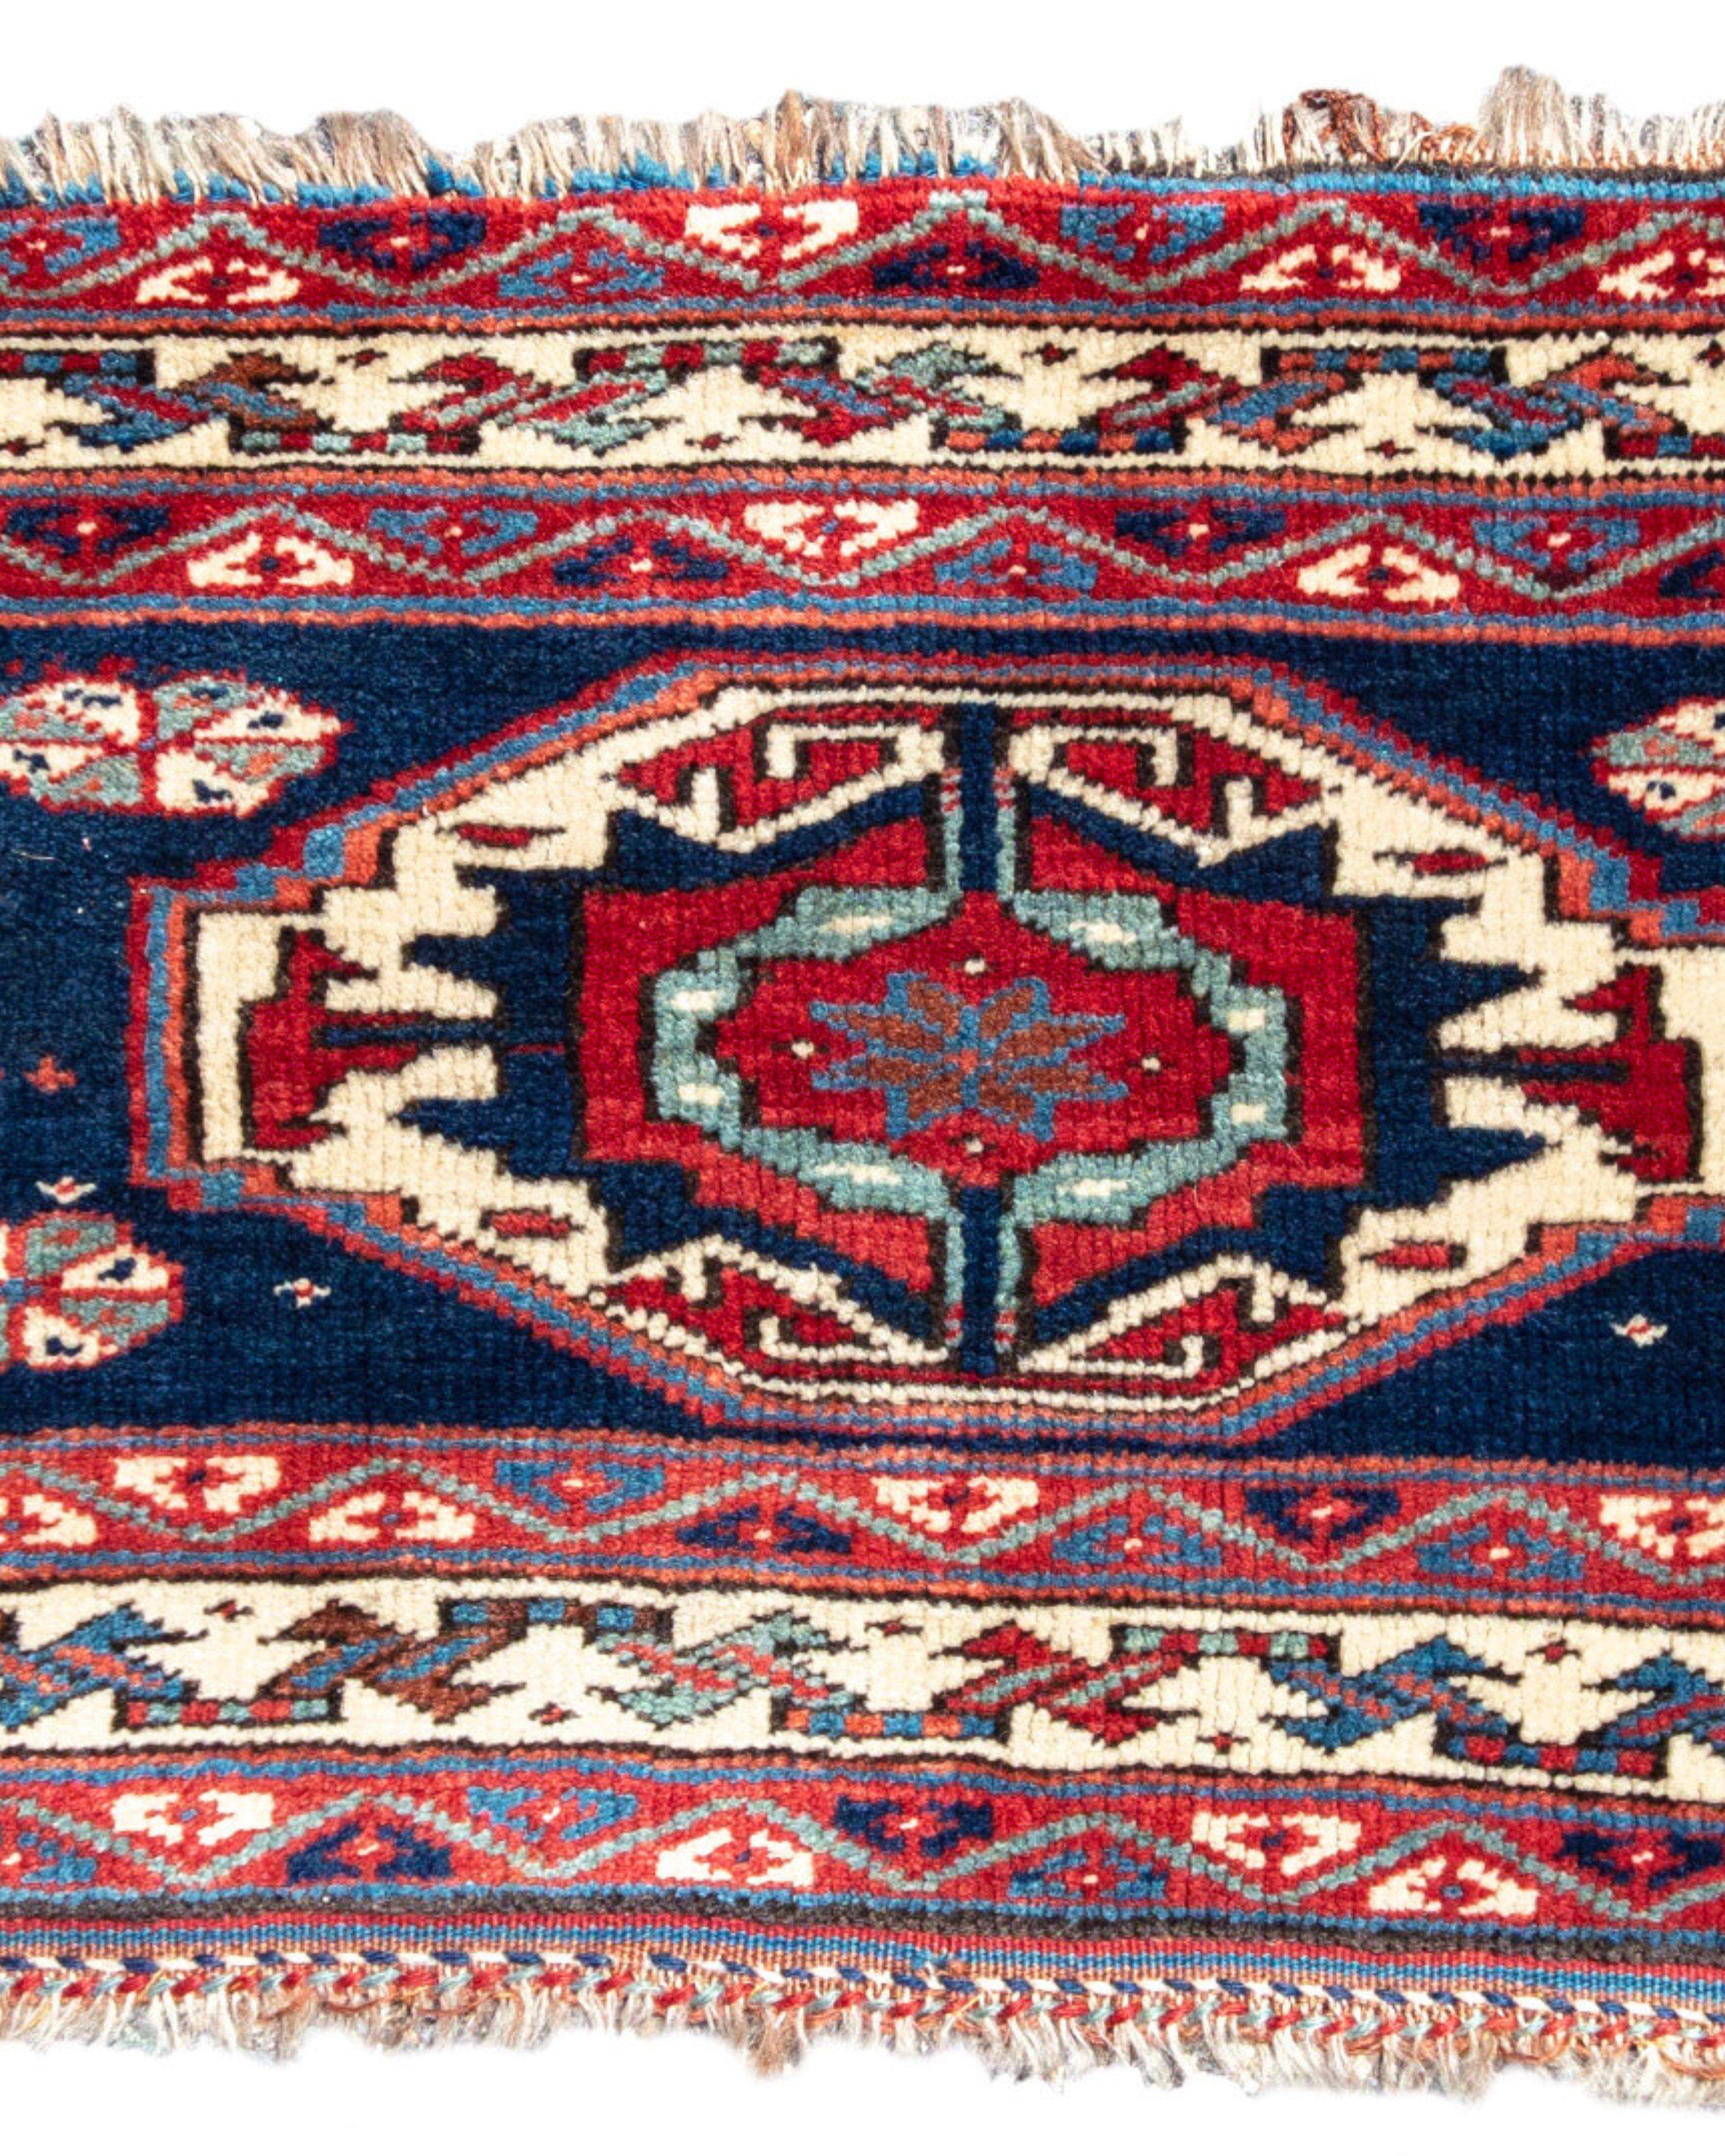 Hand-Knotted Antique Persian Veramin Torba Rug, 19th Century For Sale